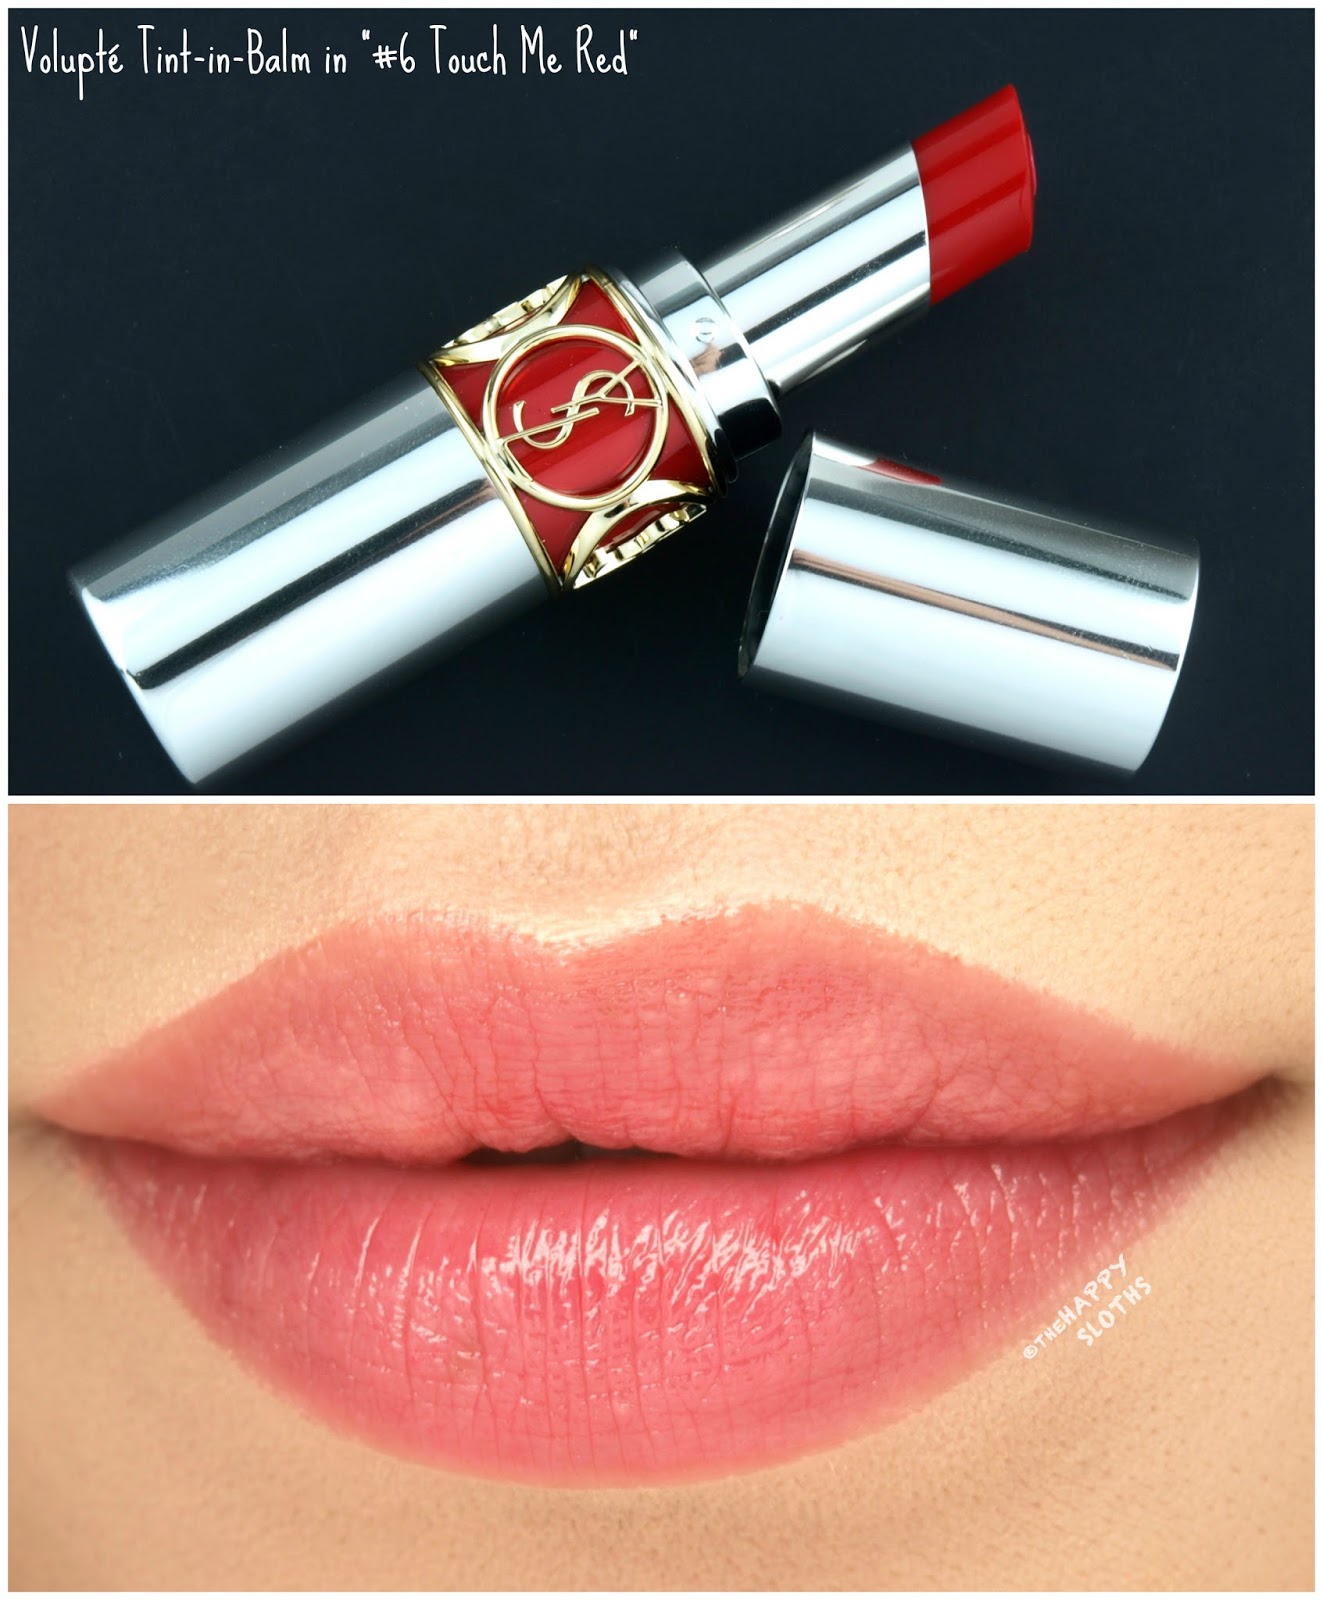 Yves Saint Laurent Volupte Tint-in-Balm in "6 Touch Me Red": Review and Swatches